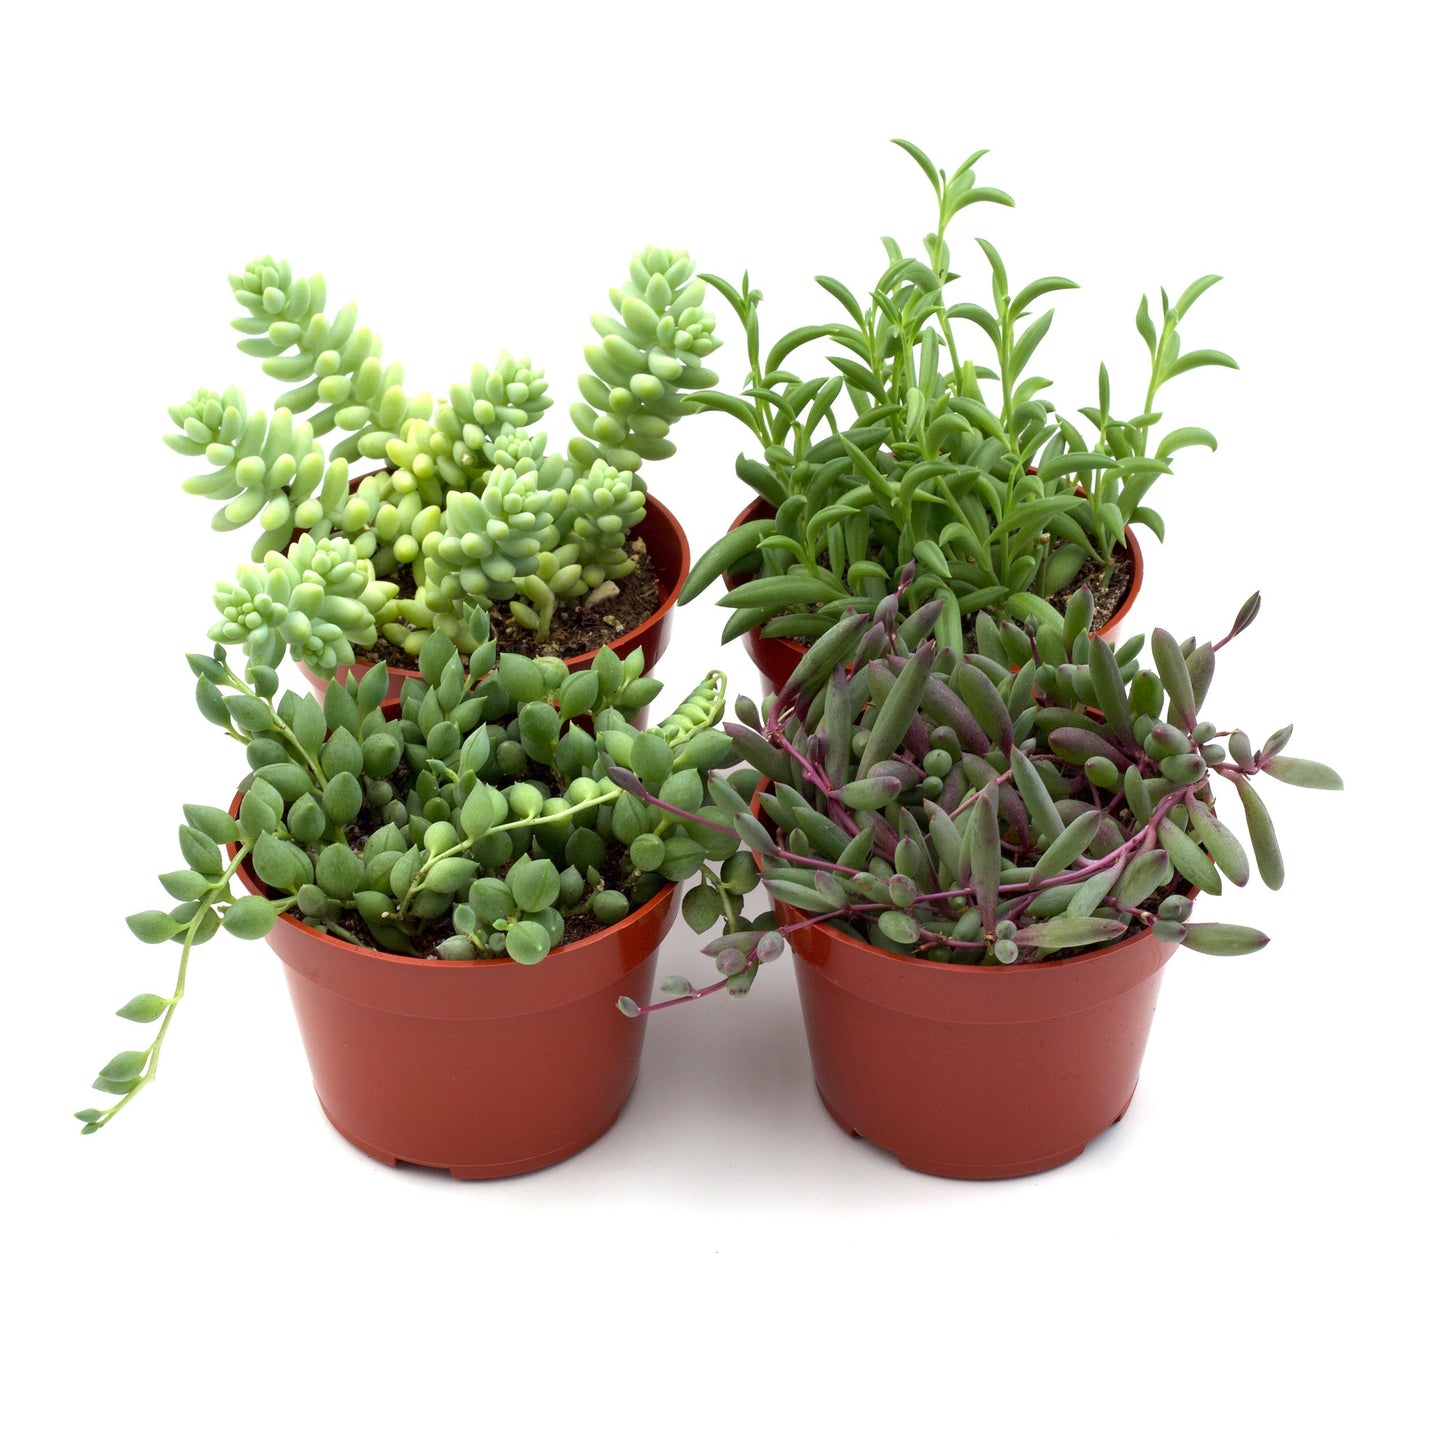 Trailing Succulents Variety 4 Pack - 4" Pots